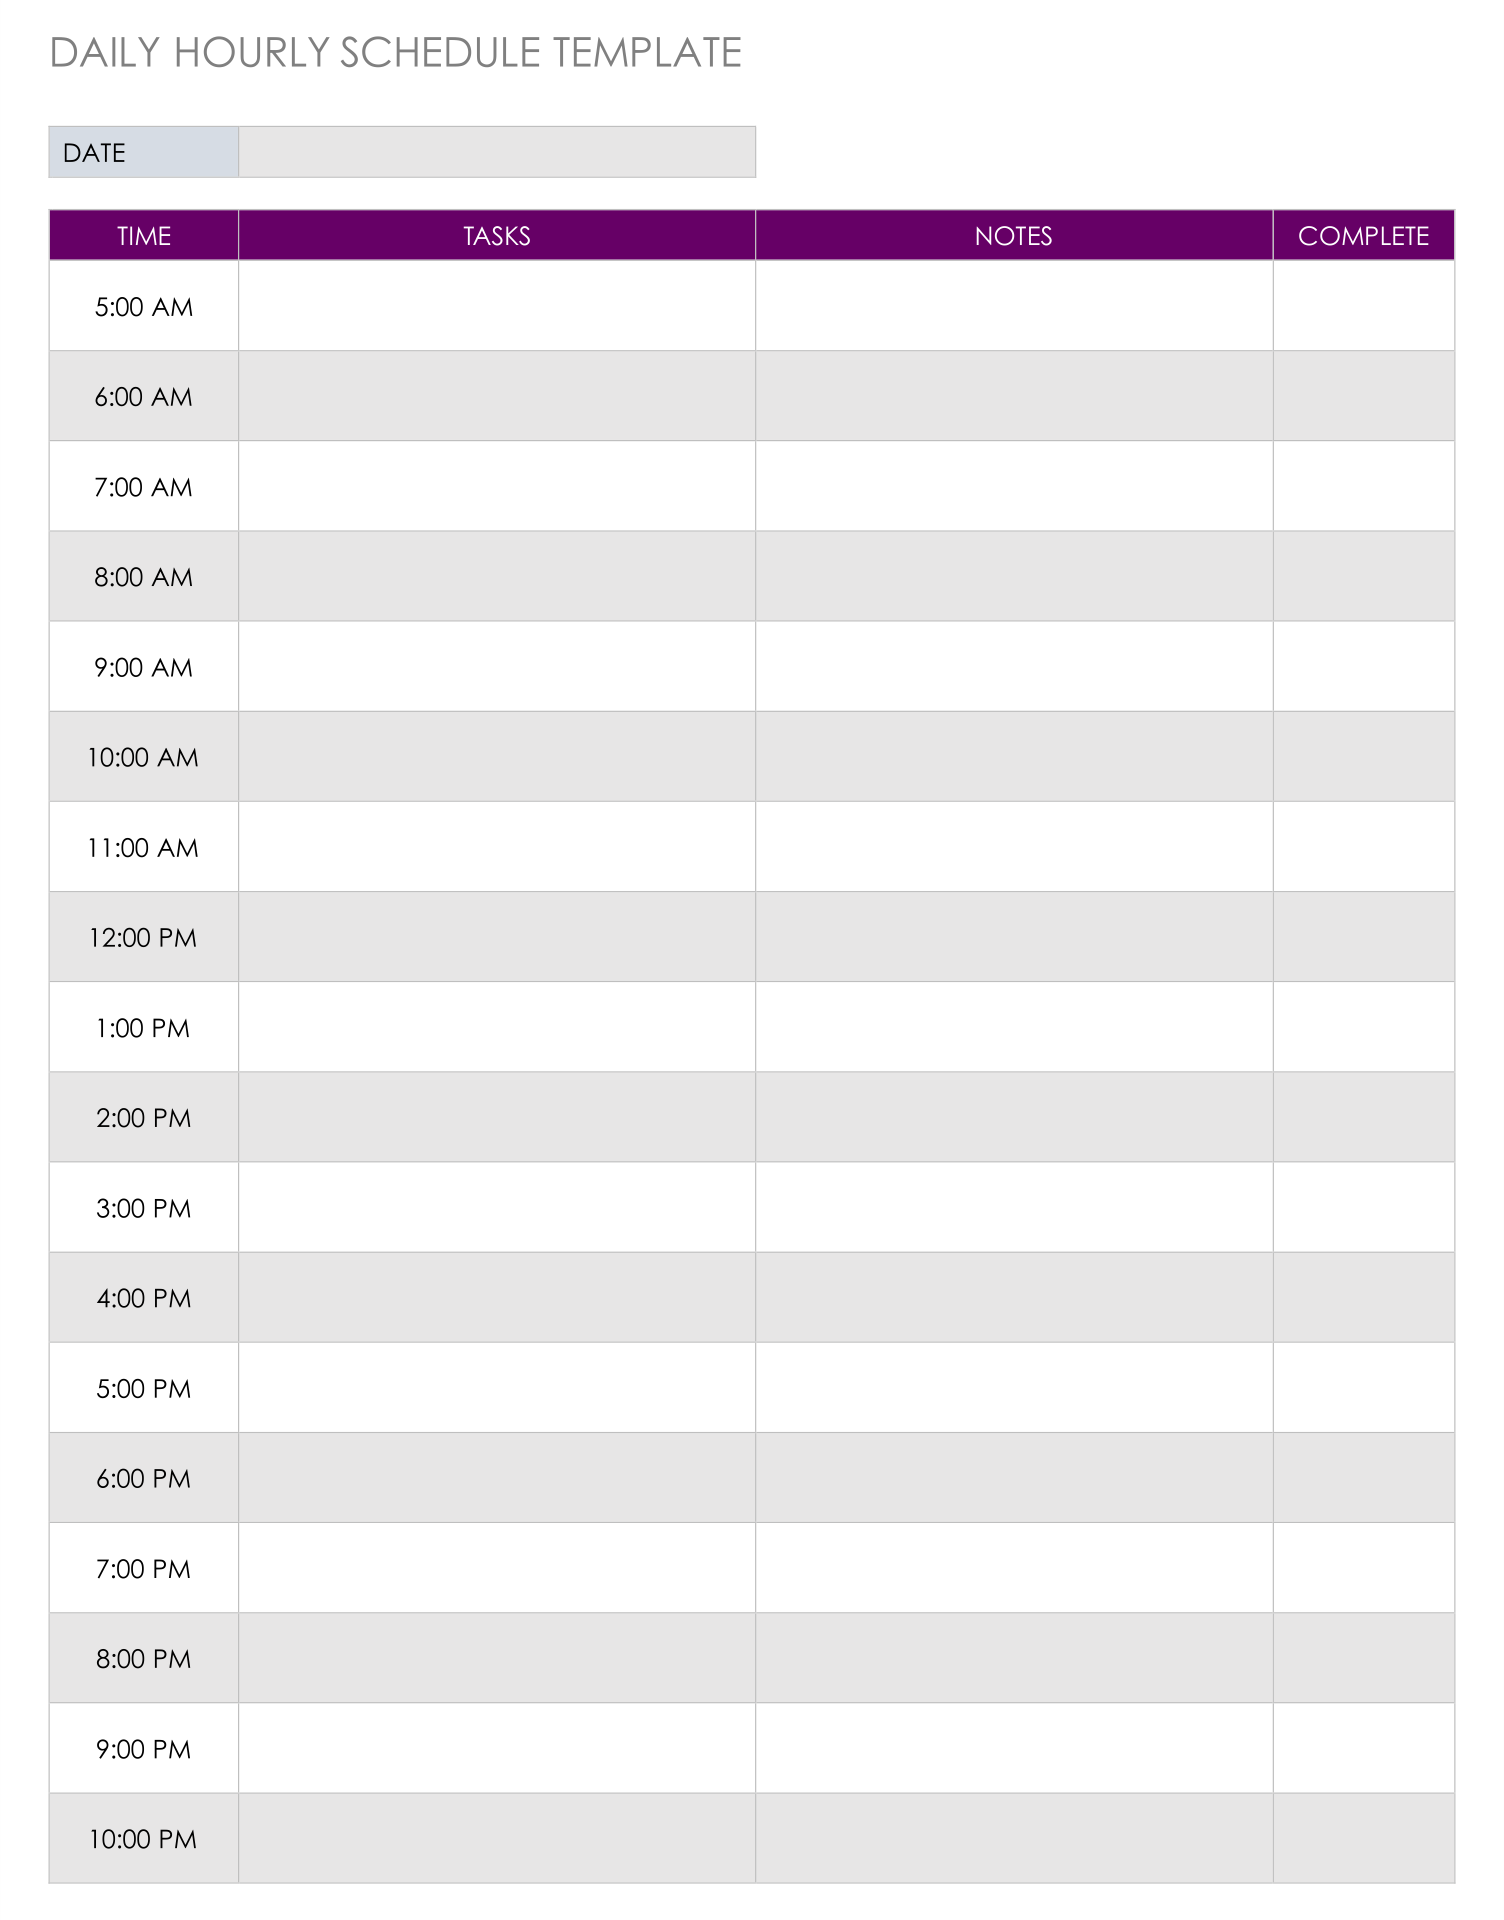 printable daily hourly schedule template 45